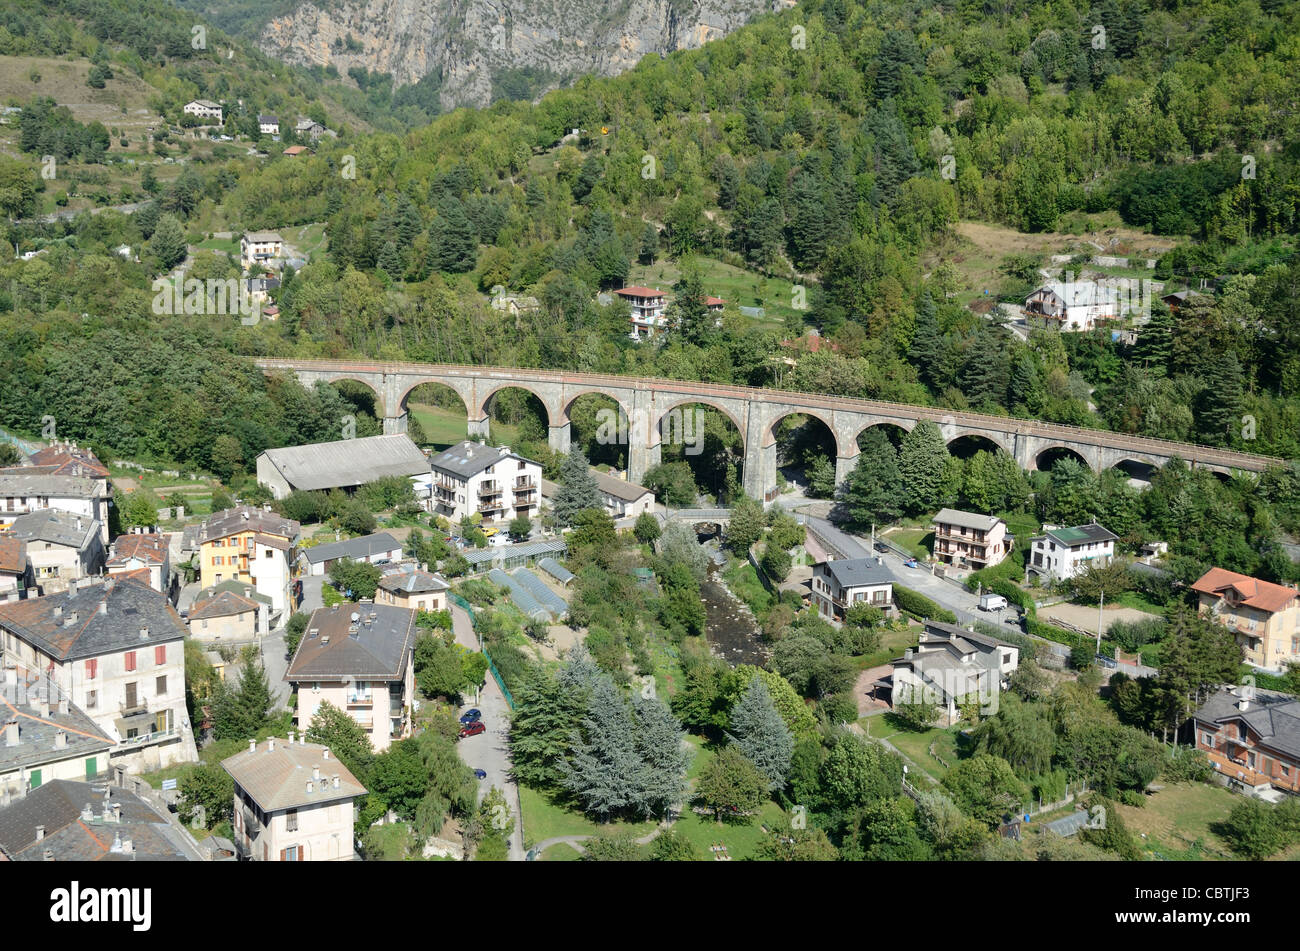 Aerial View or High-Angle View over Tende Rail or Railway Viaduct on the Nice to Cuneo Line, Tende, Roya Valley, Alpes-Maritimes, France Stock Photo